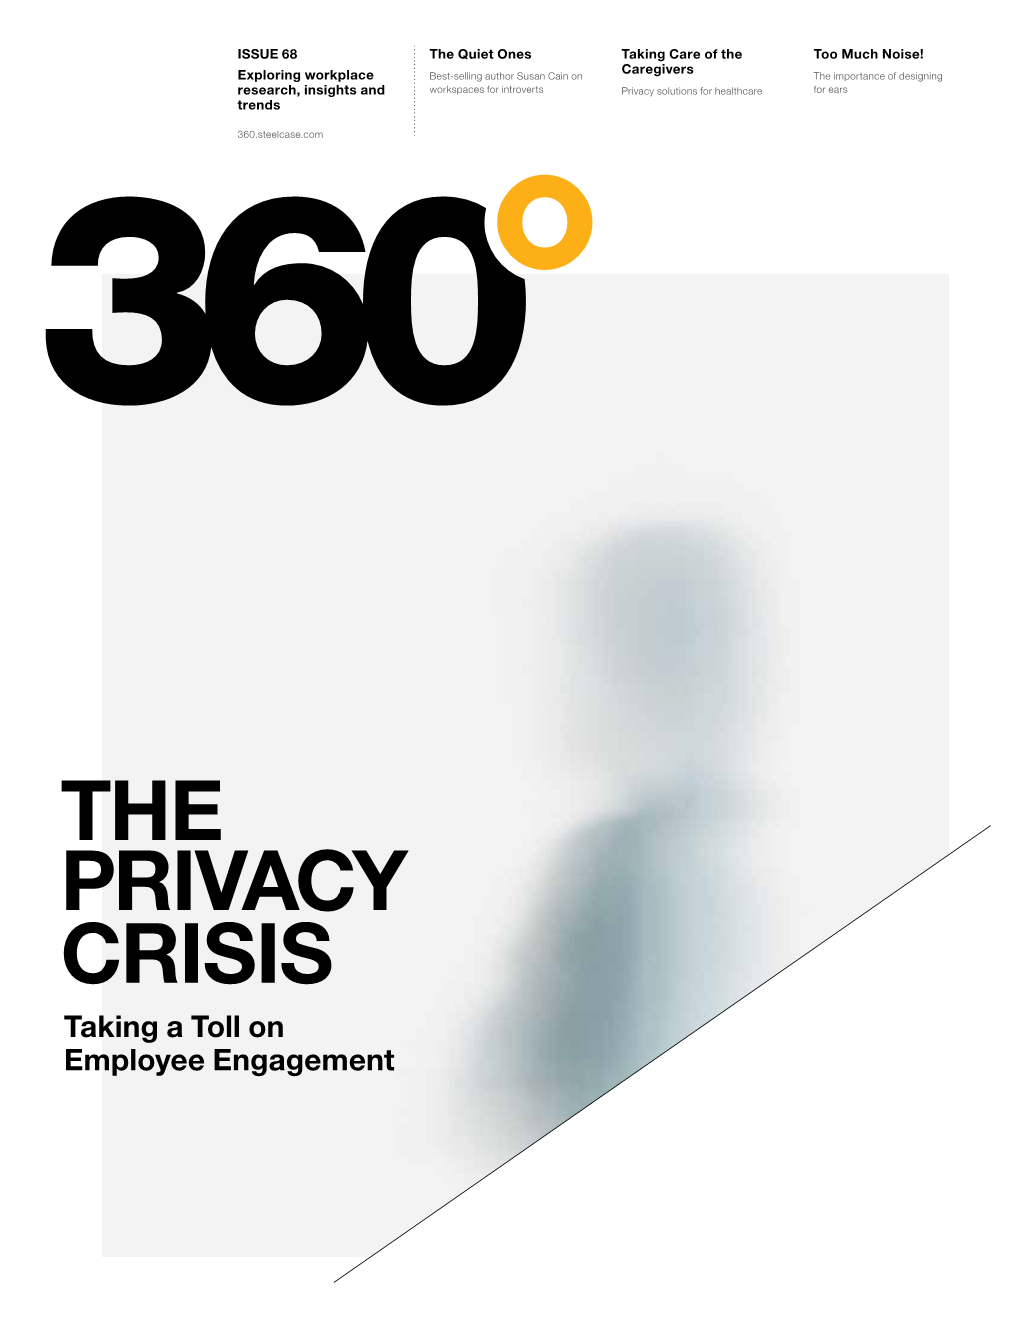 The Privacy Crisis the PRIVACY CRISIS Taking a Toll on Employee Engagement Steelcase About This Issue